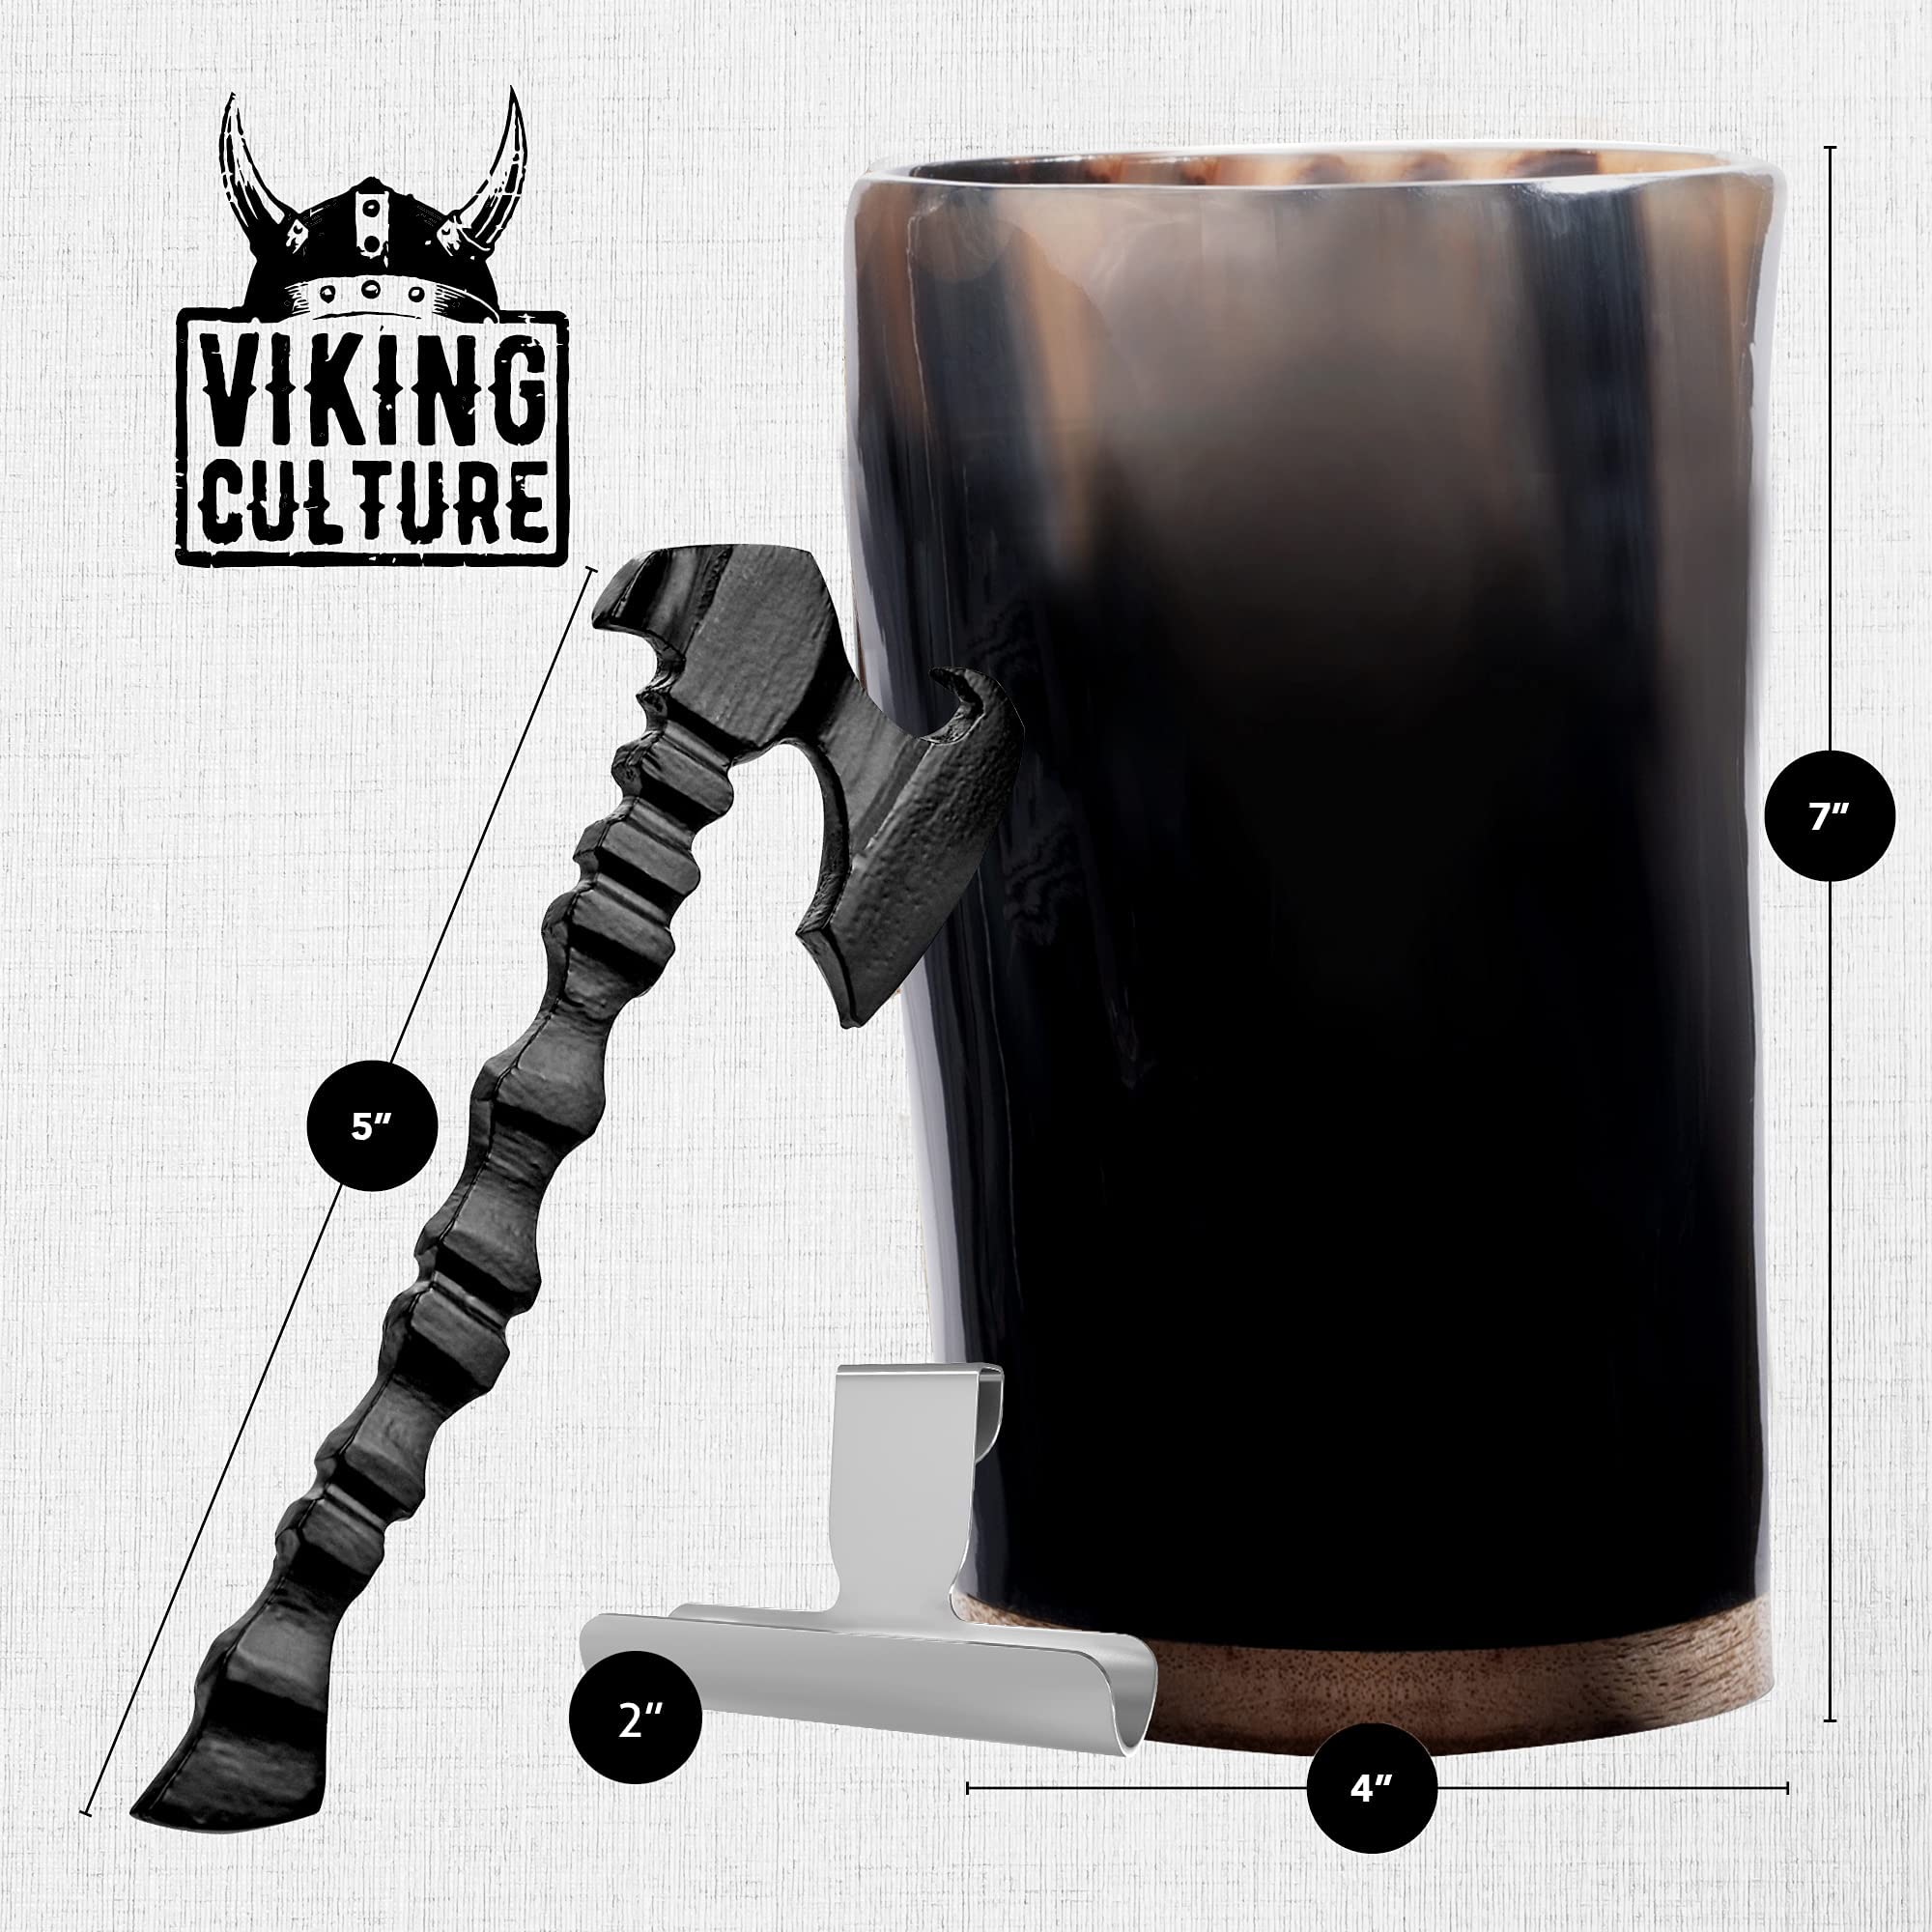 Viking Culture Horn Mead Cup - Nordic Inspired Drinking Vessel | Handmade Goblet for Wine Beer Ale - Safe and Unique Drink Tumbler Gift with Axe Bottle Opener, Cigar Holder and Burlap Bag